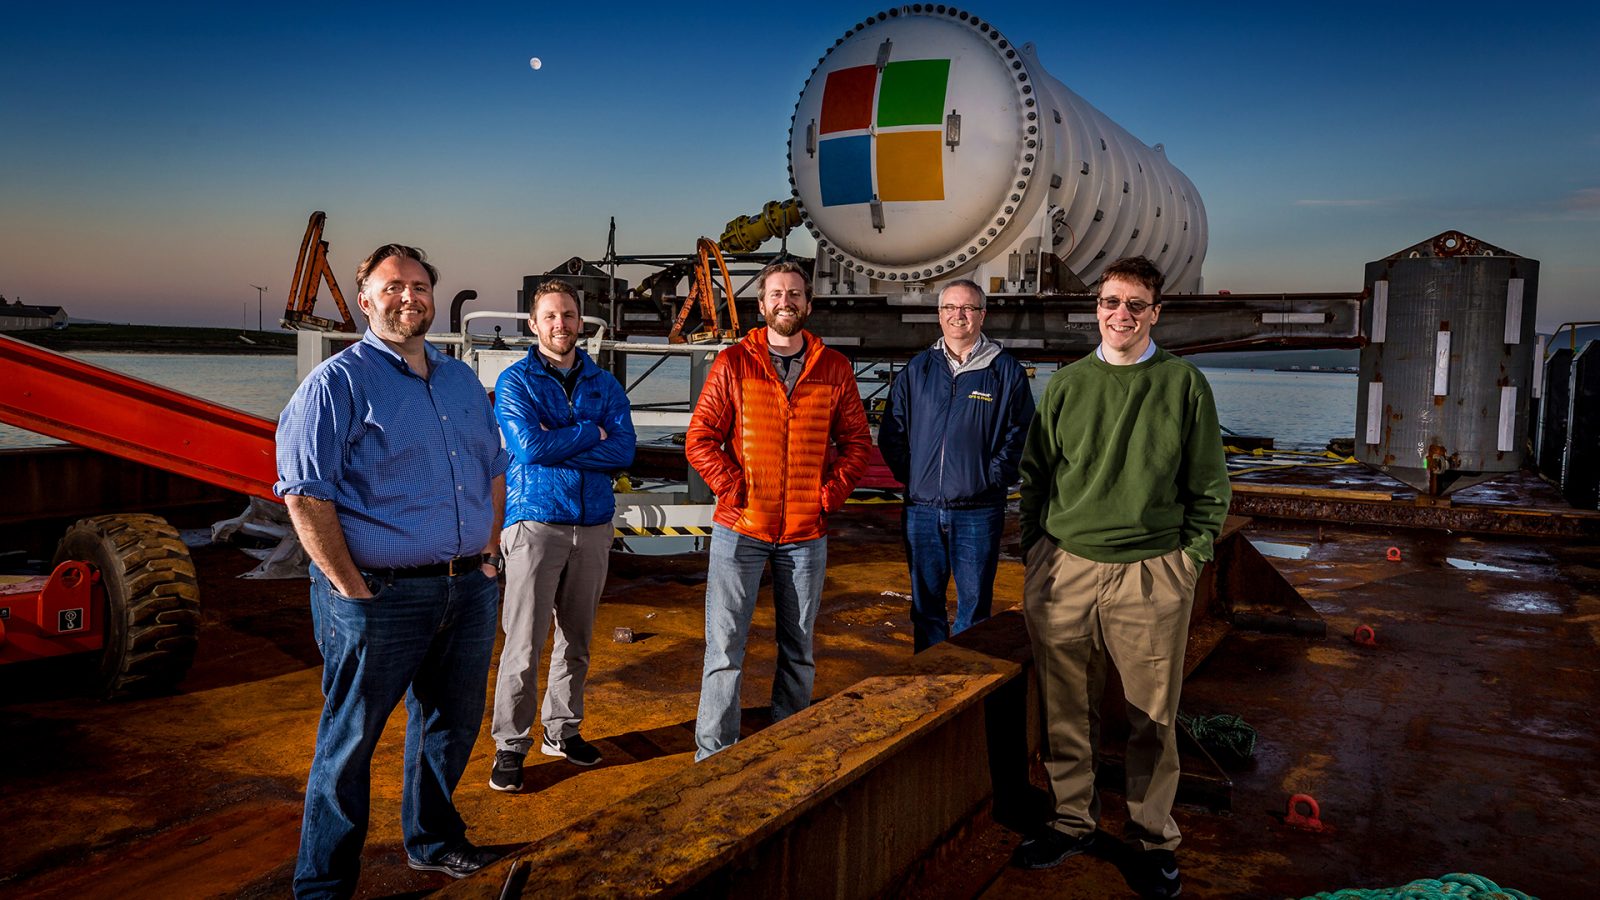 Microsoft Sends a Data Center to the Ocean Floor to Find a COVID-19 Vaccine